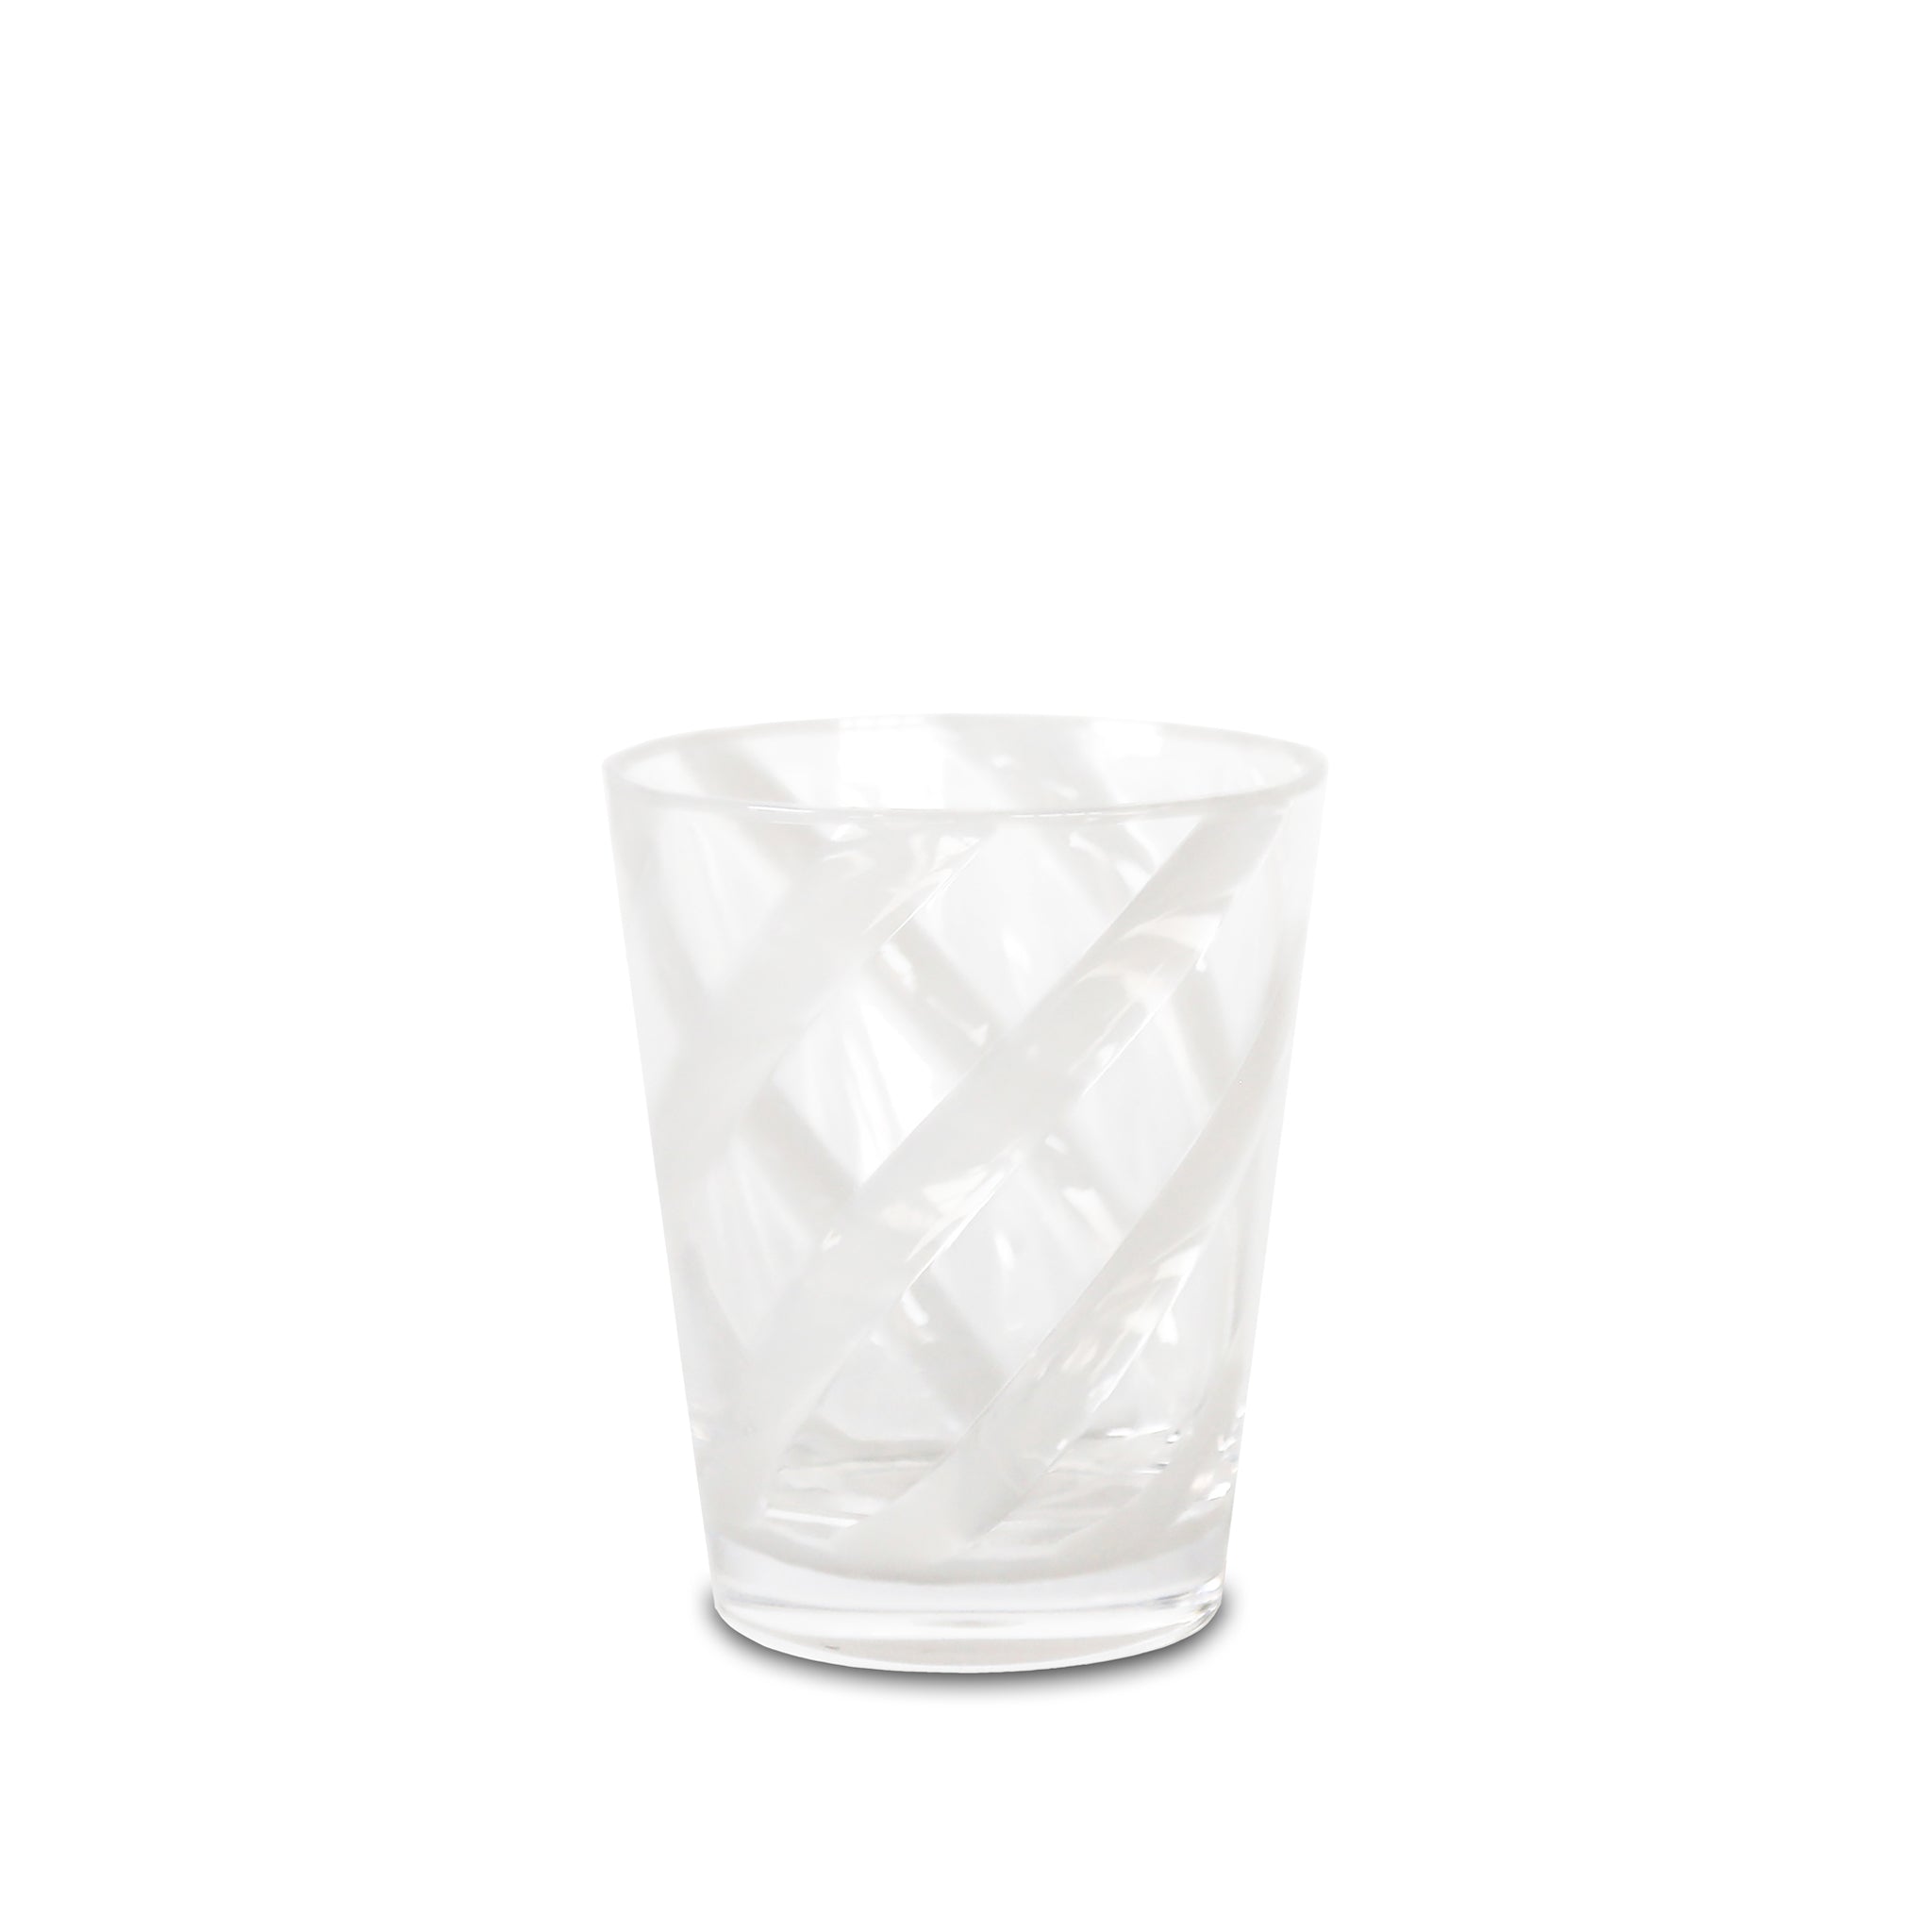 Recyclable Plastic Tumbler in White with Clear Spiral